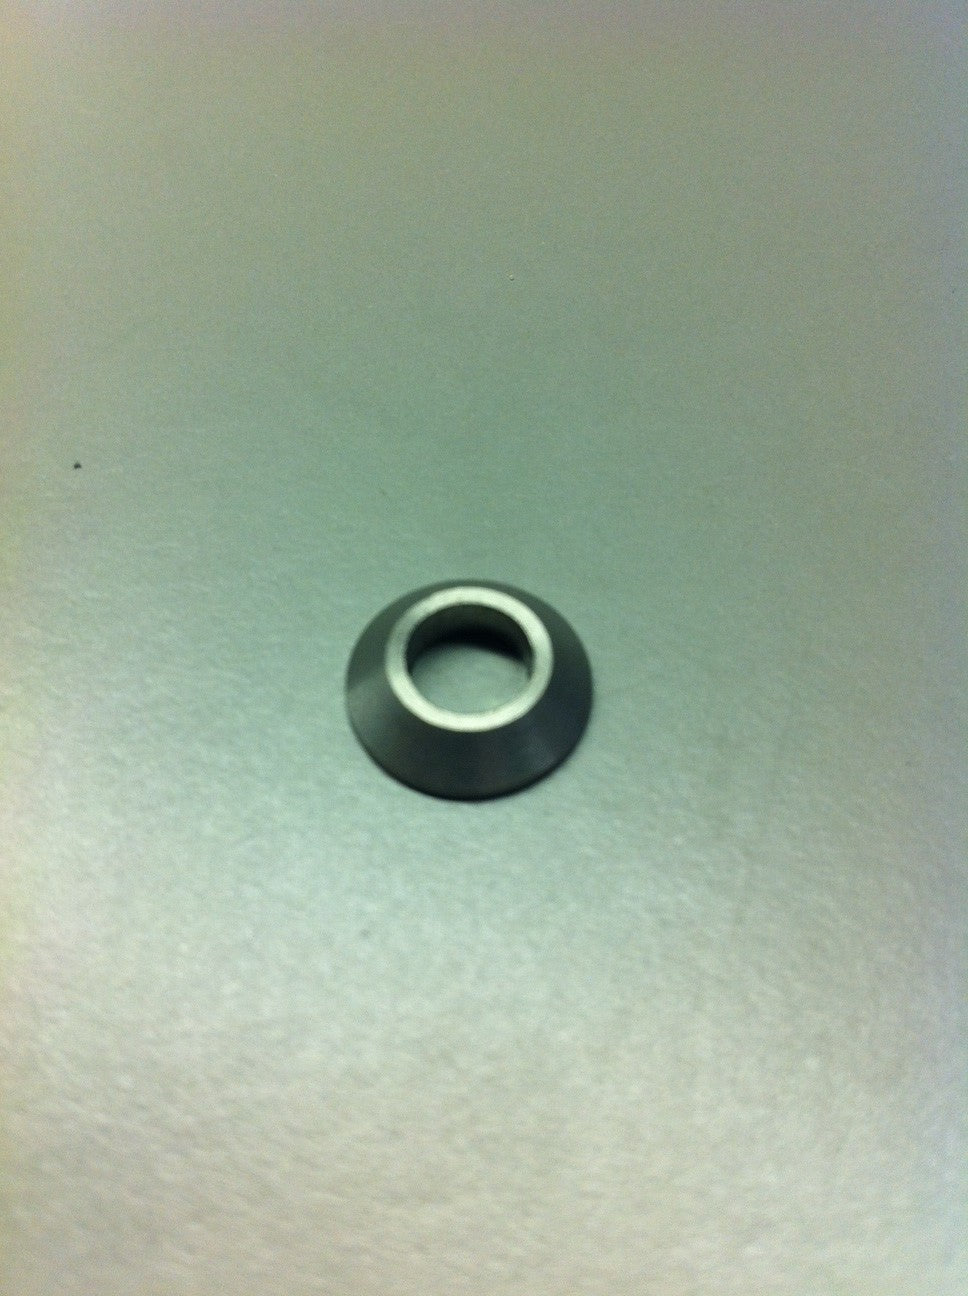 Tapered Washer For Vd Arb Clevis